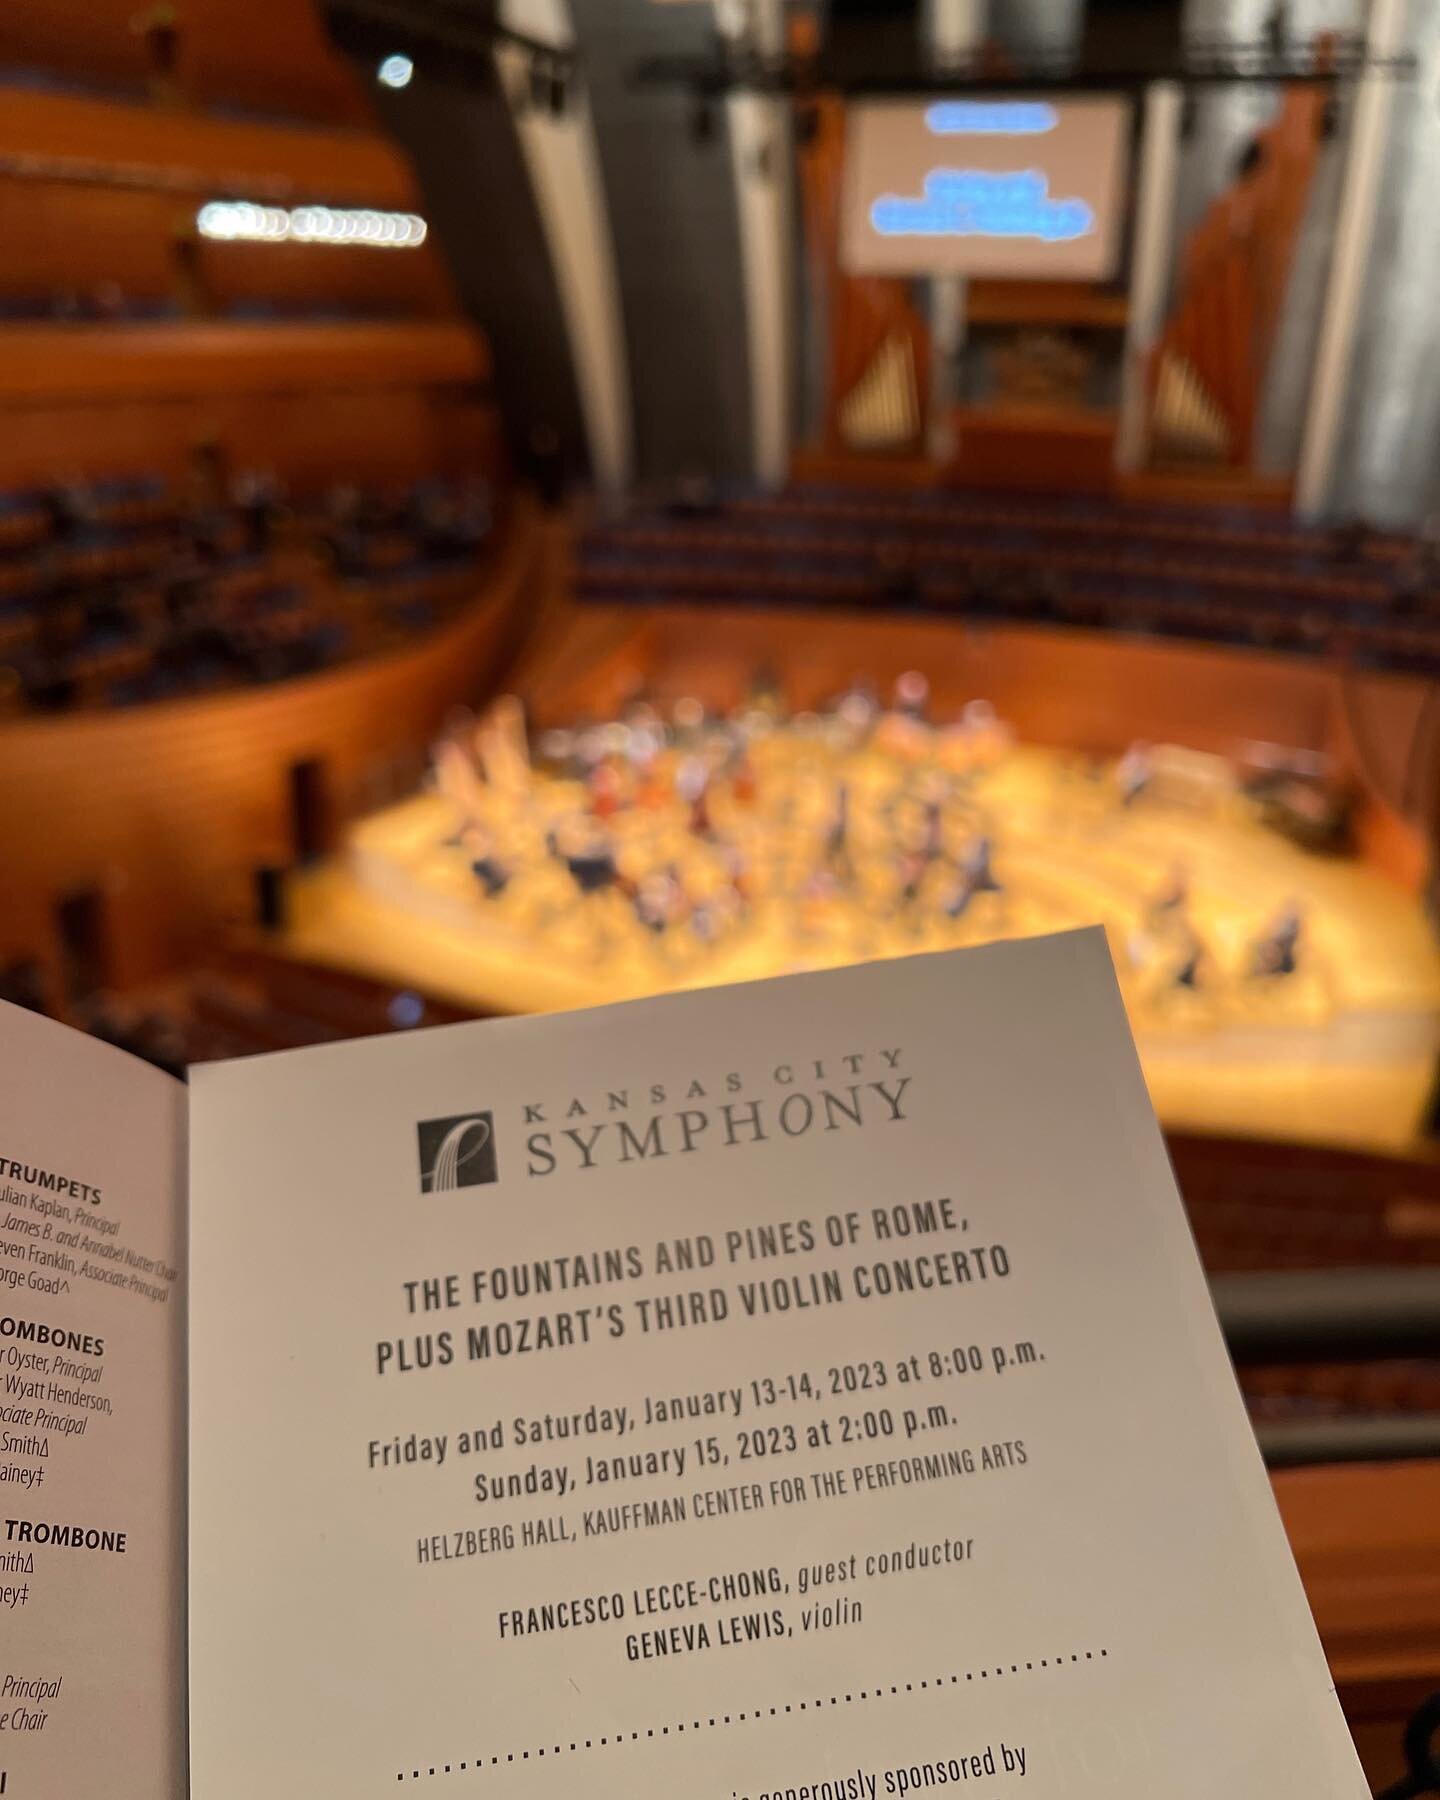 Excited to hear the KC Symphony lead by Francesco Lecce-Chong! Long time no see! #orchestra #classical #music  #symphony  #respighi #pines #mozart #violin #concerto #conductor #musician #inspire #transform #midwest #kansascity #baton #travel #hall #l